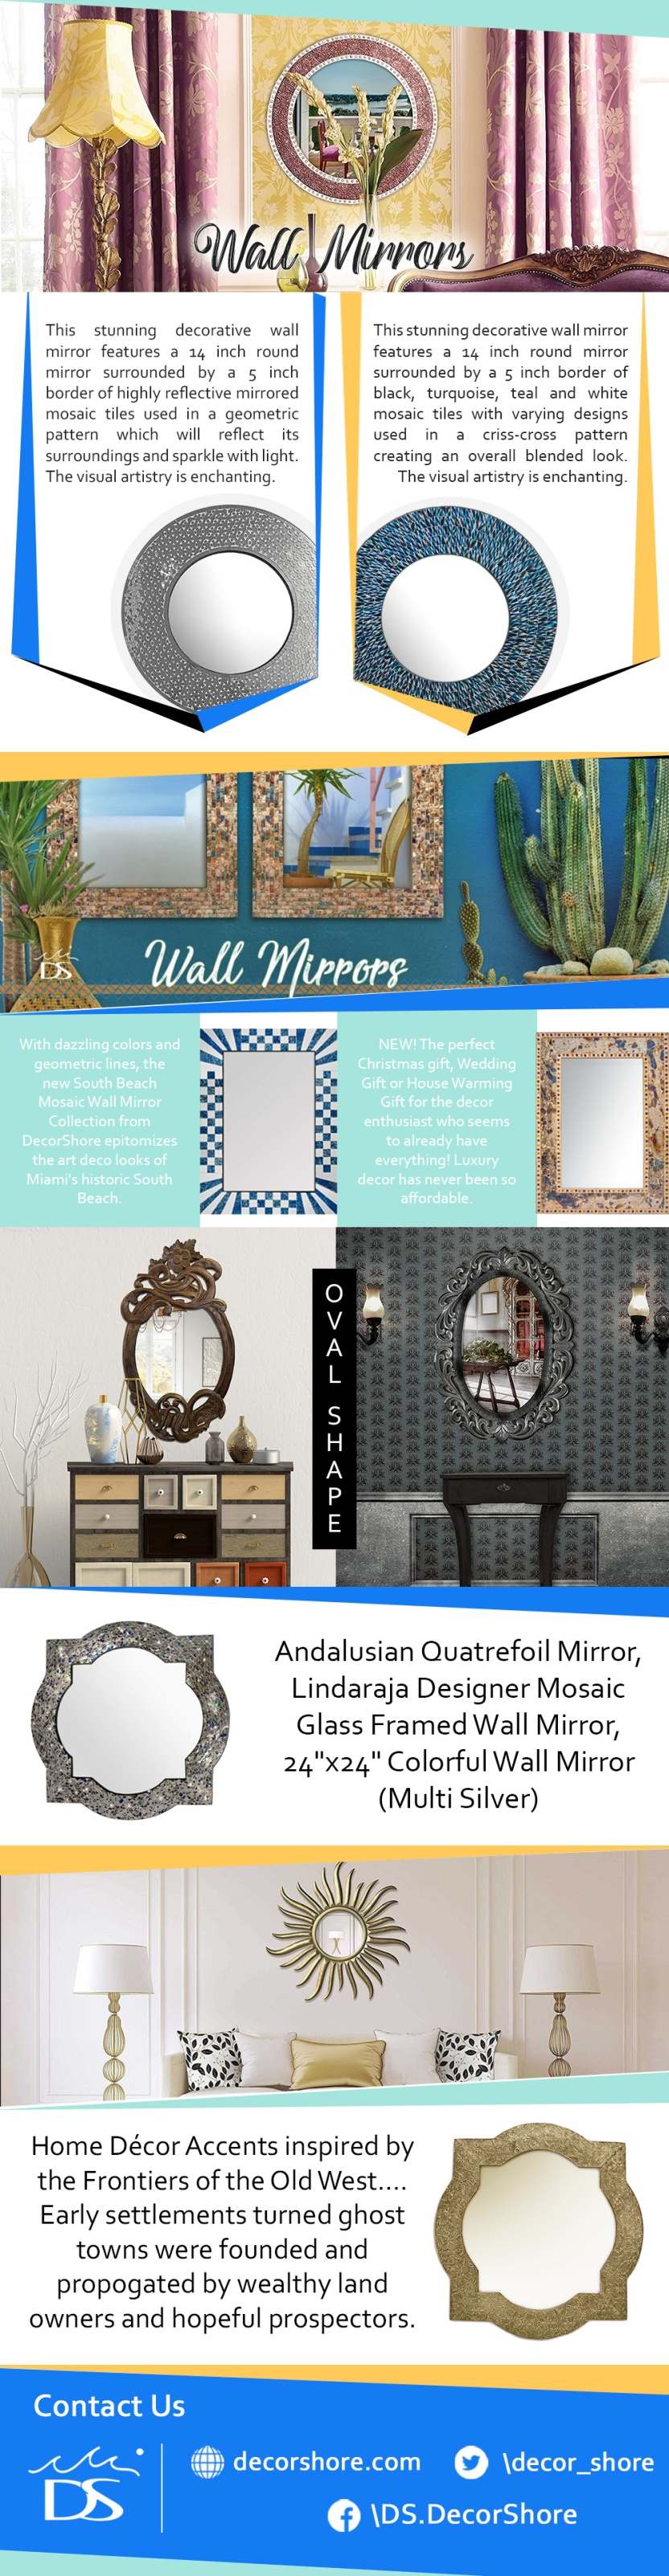 Wall mirror for home decor #infographic #Home Decor #Wall mirror #Mirror #infographics